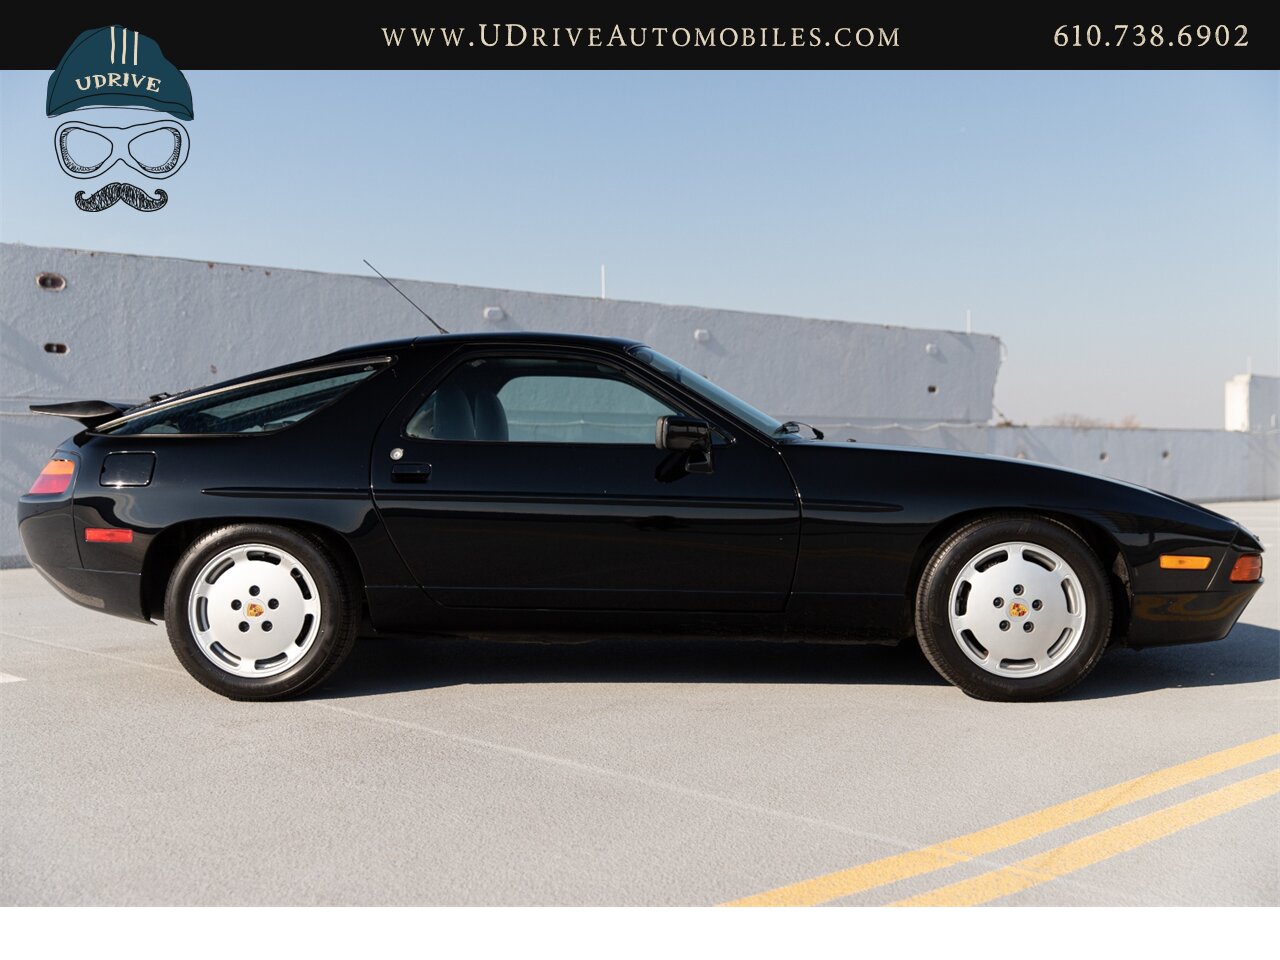 1990 Porsche 928 S4 $58k in Service History Since 2014   - Photo 15 - West Chester, PA 19382